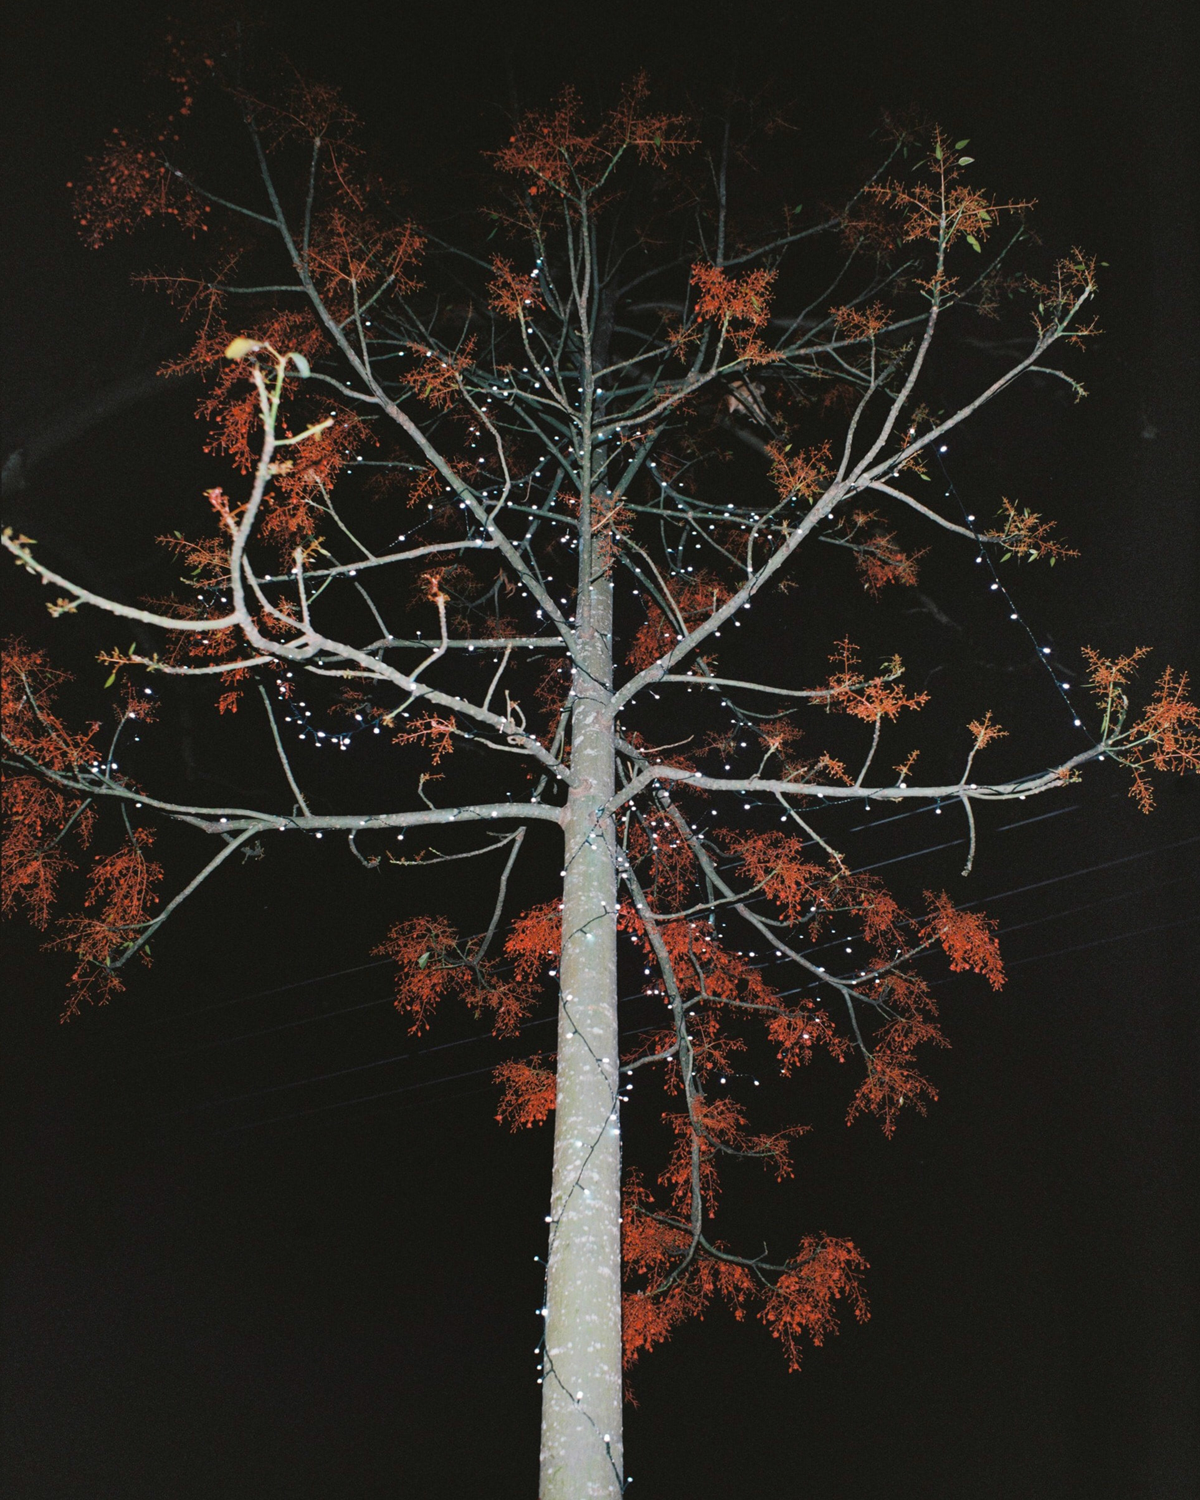 Colour photograph depicting a tree with red foliage shot with bright flash at night.